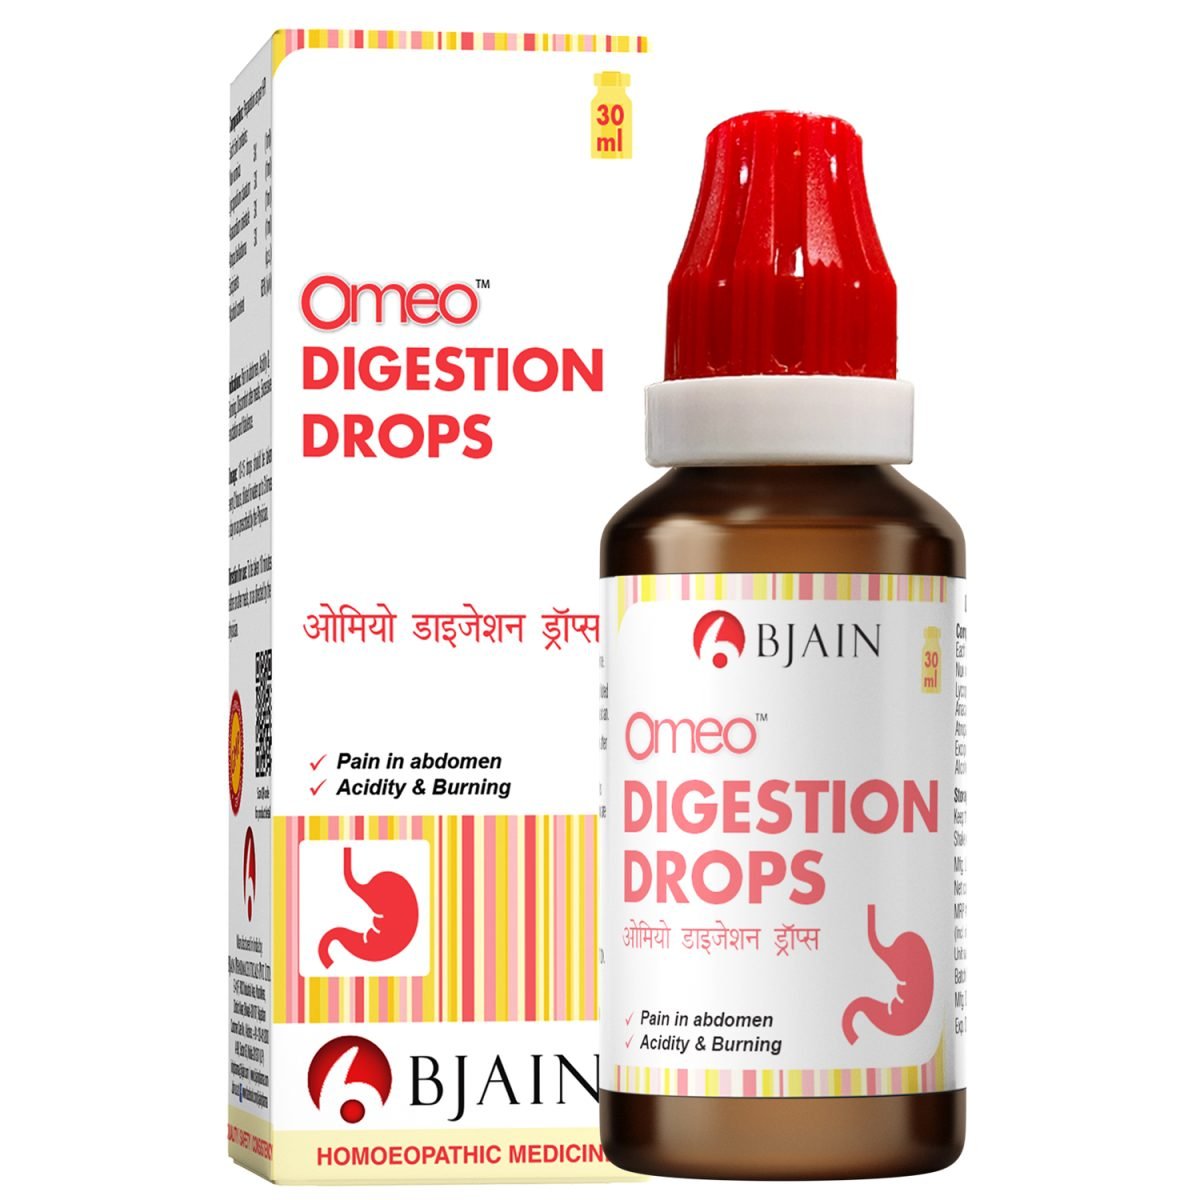 OMEO DIGESTION DROPS